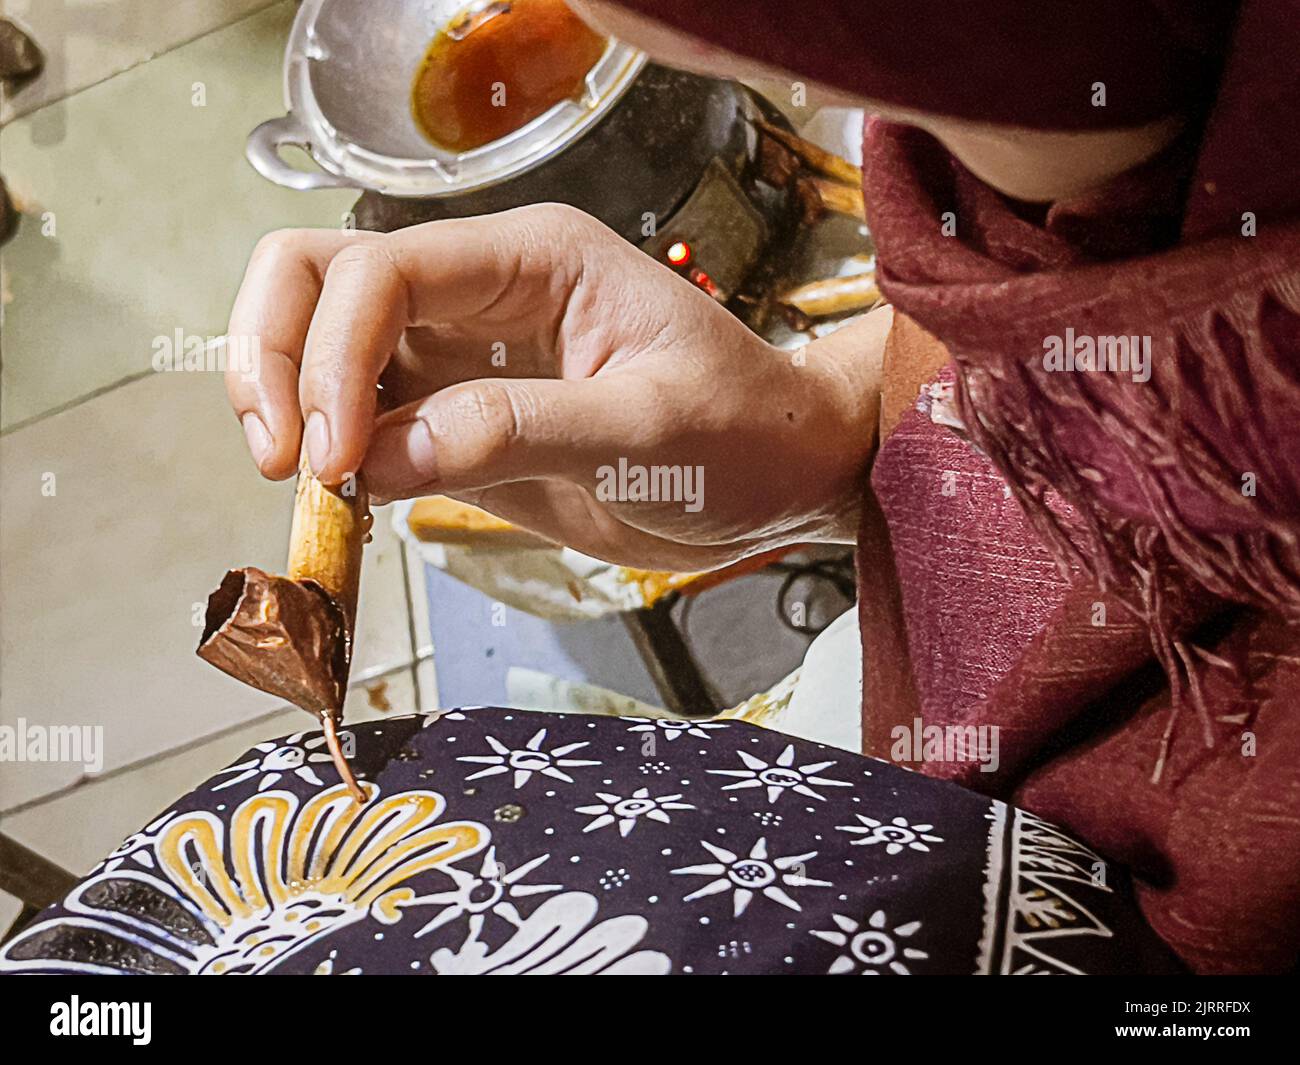 Java, Indonesia, June 13, 2022 - Batik originated in Java and is a technique of wax-resistant dye applied to the entire cloth. Stock Photo